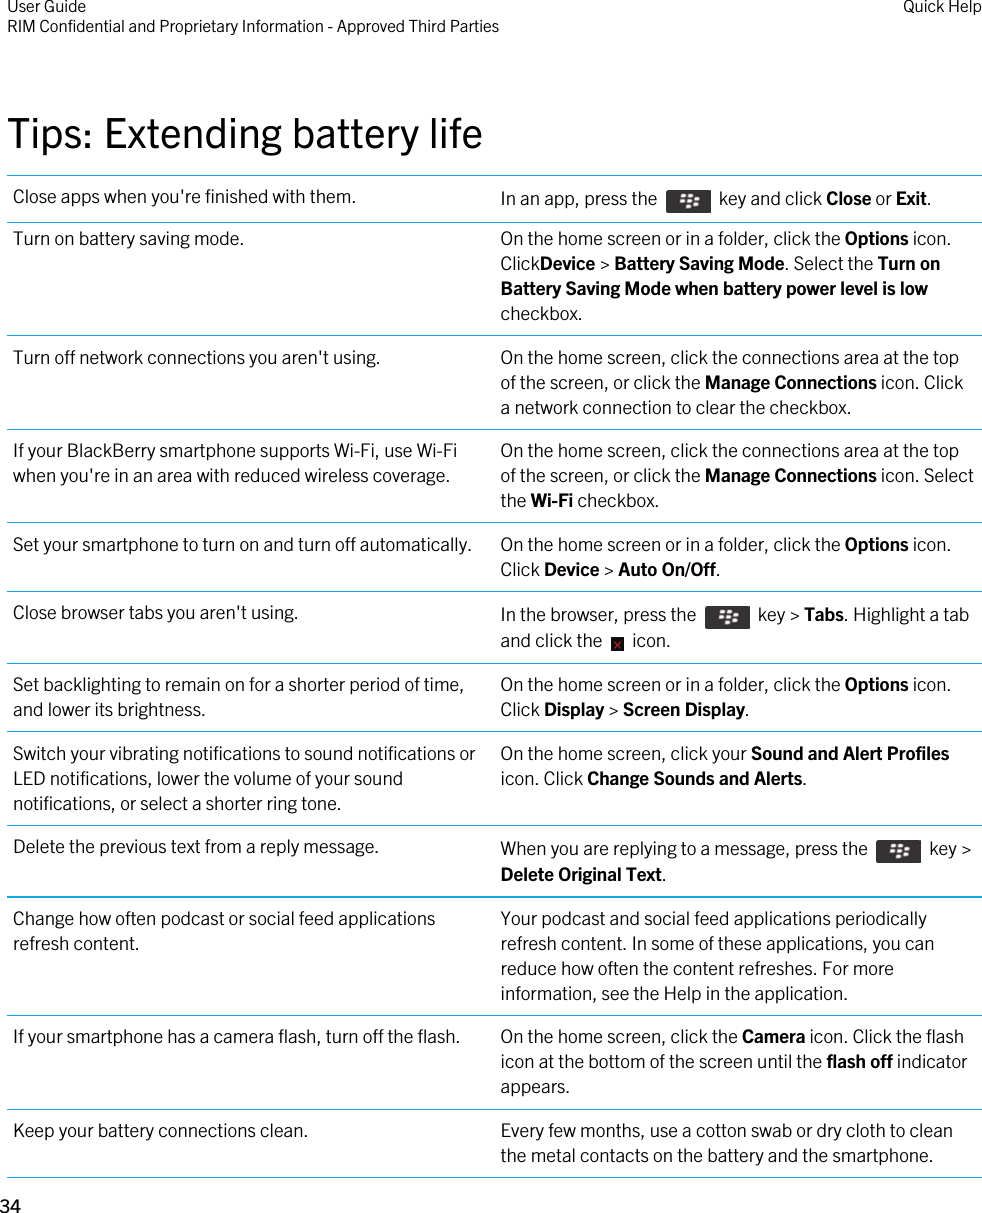 Tips: Extending battery lifeClose apps when you&apos;re finished with them. In an app, press the    key and click Close or Exit.Turn on battery saving mode. On the home screen or in a folder, click the Options icon. ClickDevice &gt; Battery Saving Mode. Select the Turn on Battery Saving Mode when battery power level is low checkbox.Turn off network connections you aren&apos;t using. On the home screen, click the connections area at the top of the screen, or click the Manage Connections icon. Click a network connection to clear the checkbox.If your BlackBerry smartphone supports Wi-Fi, use Wi-Fi when you&apos;re in an area with reduced wireless coverage.On the home screen, click the connections area at the top of the screen, or click the Manage Connections icon. Select the Wi-Fi checkbox.Set your smartphone to turn on and turn off automatically. On the home screen or in a folder, click the Options icon. Click Device &gt; Auto On/Off.Close browser tabs you aren&apos;t using. In the browser, press the    key &gt; Tabs. Highlight a tab and click the    icon.Set backlighting to remain on for a shorter period of time, and lower its brightness.On the home screen or in a folder, click the Options icon. Click Display &gt; Screen Display.Switch your vibrating notifications to sound notifications or LED notifications, lower the volume of your sound notifications, or select a shorter ring tone.On the home screen, click your Sound and Alert Profiles icon. Click Change Sounds and Alerts.Delete the previous text from a reply message. When you are replying to a message, press the    key &gt; Delete Original Text.Change how often podcast or social feed applications refresh content.Your podcast and social feed applications periodically refresh content. In some of these applications, you can reduce how often the content refreshes. For more information, see the Help in the application.If your smartphone has a camera flash, turn off the flash. On the home screen, click the Camera icon. Click the flash icon at the bottom of the screen until the flash off indicator appears.Keep your battery connections clean. Every few months, use a cotton swab or dry cloth to clean the metal contacts on the battery and the smartphone.User GuideRIM Confidential and Proprietary Information - Approved Third Parties Quick Help34 